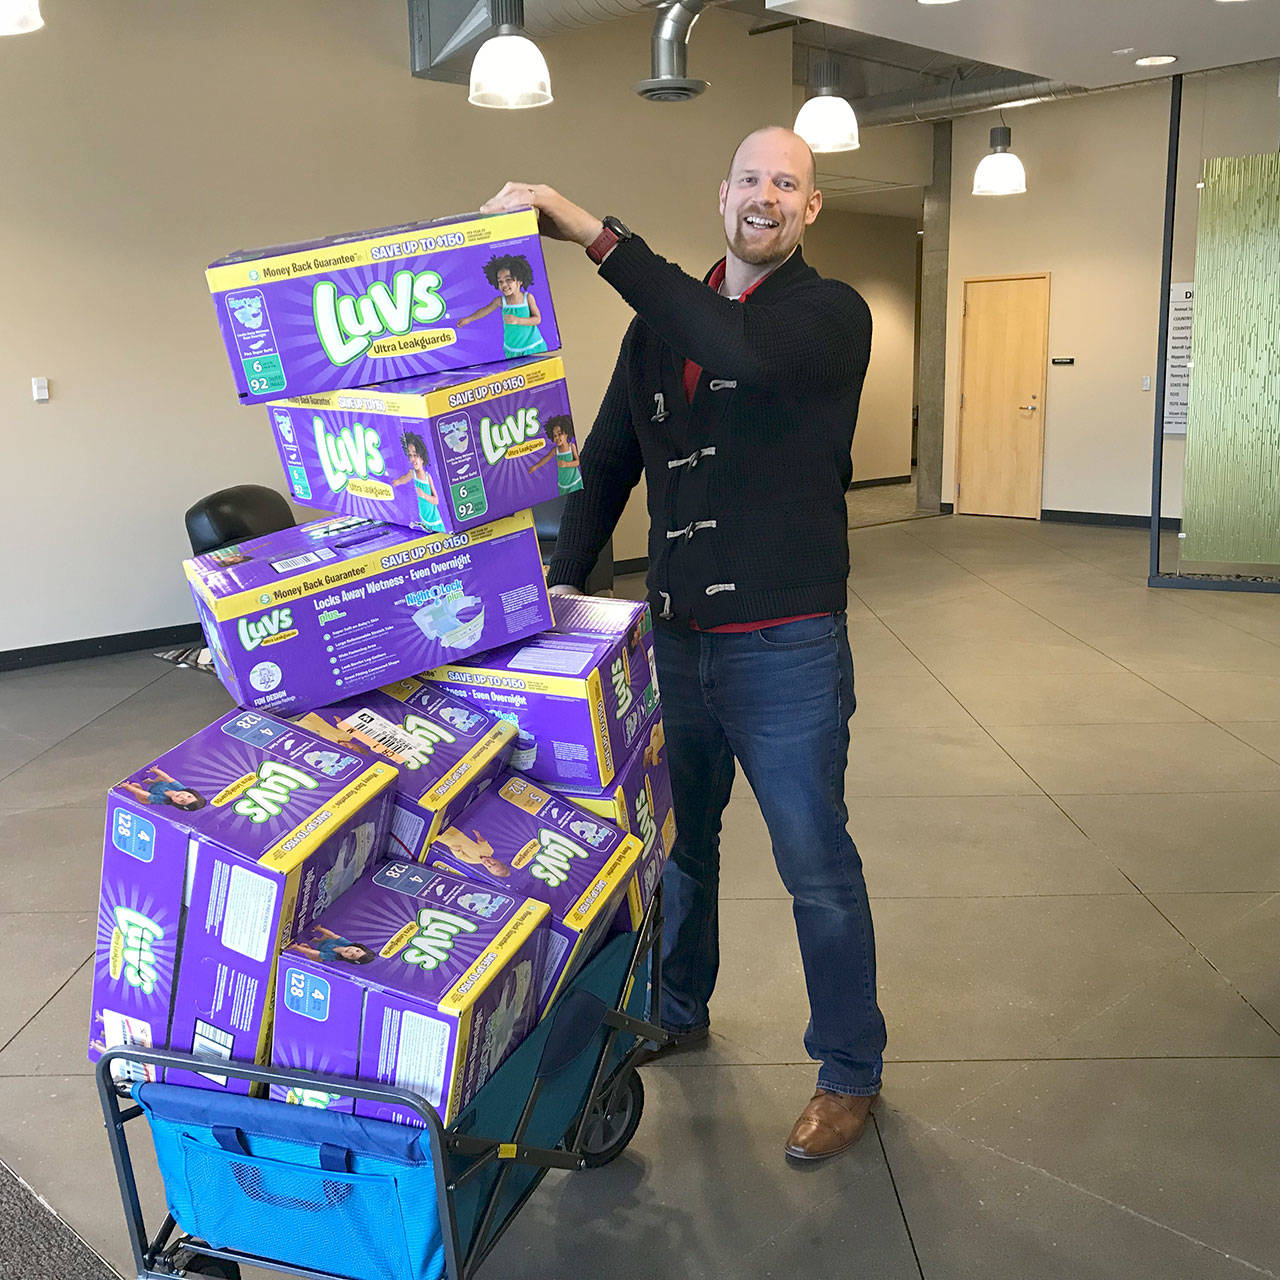 Ted Colby collected more than 20,000 diapers for the March of Diapers drive. Courtesy Shelley Pauls